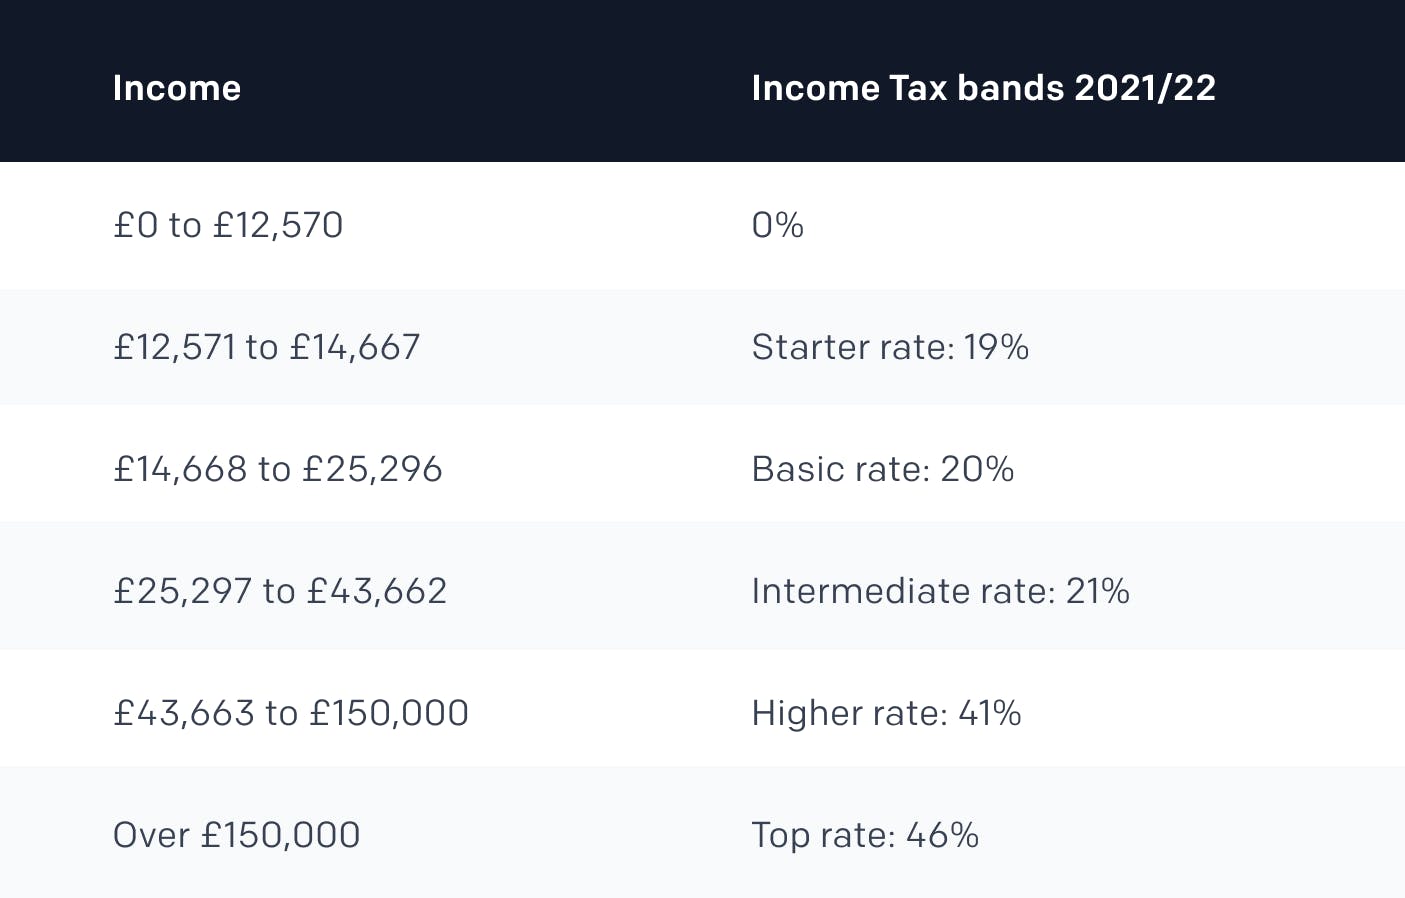 Scottish tax bands for 2021/22